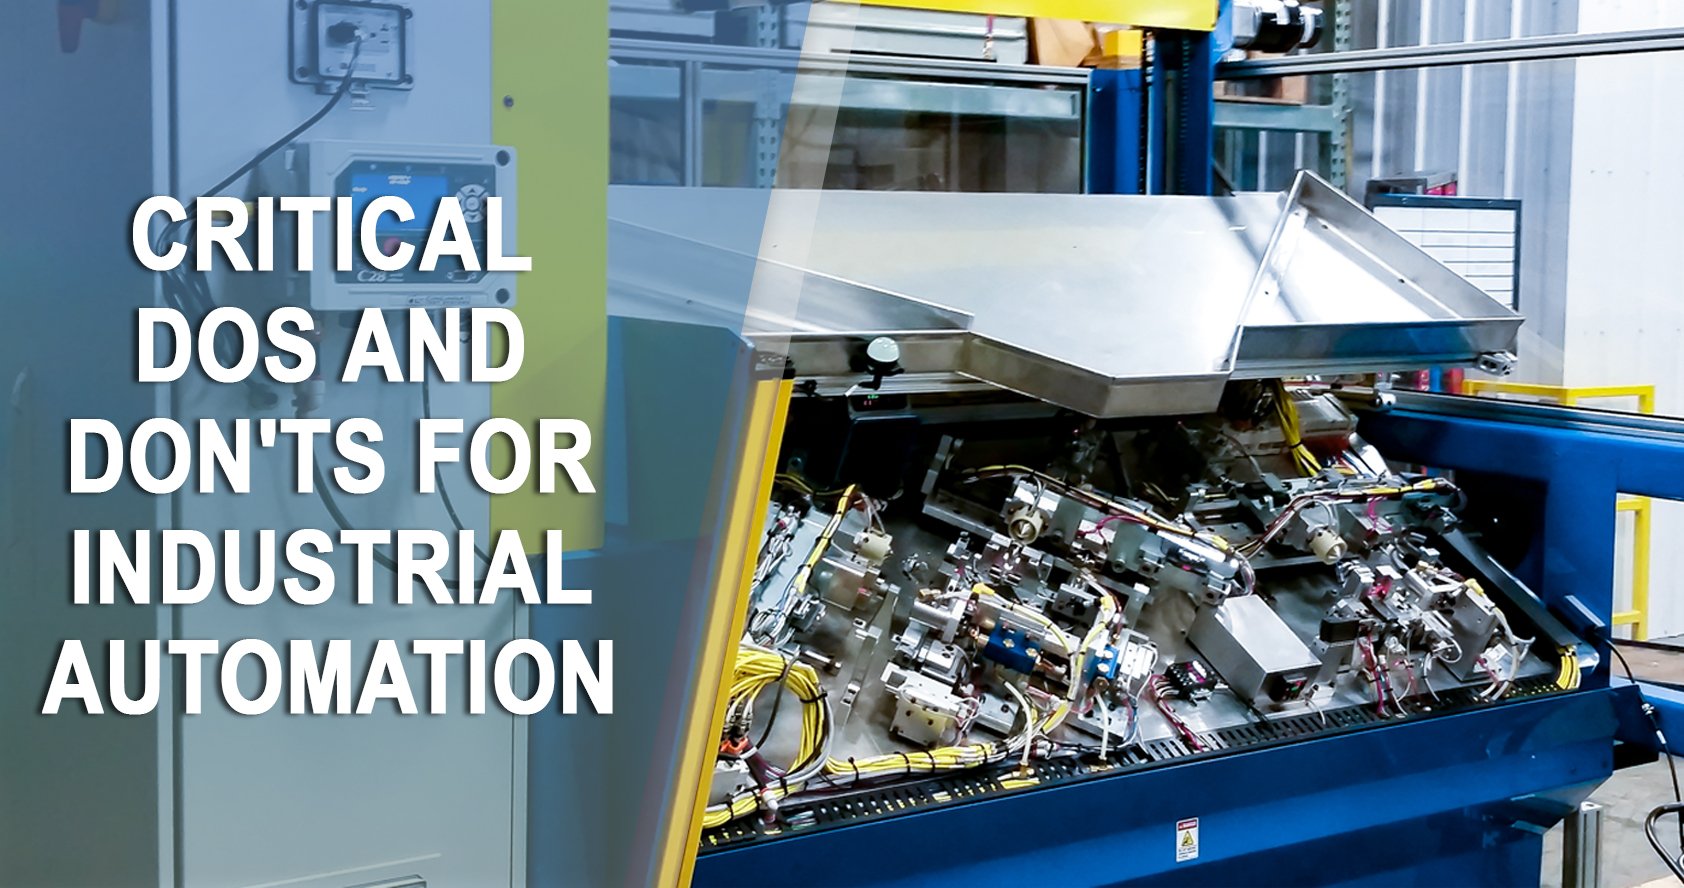 Critical Dos and Don'ts for Industrial Automation